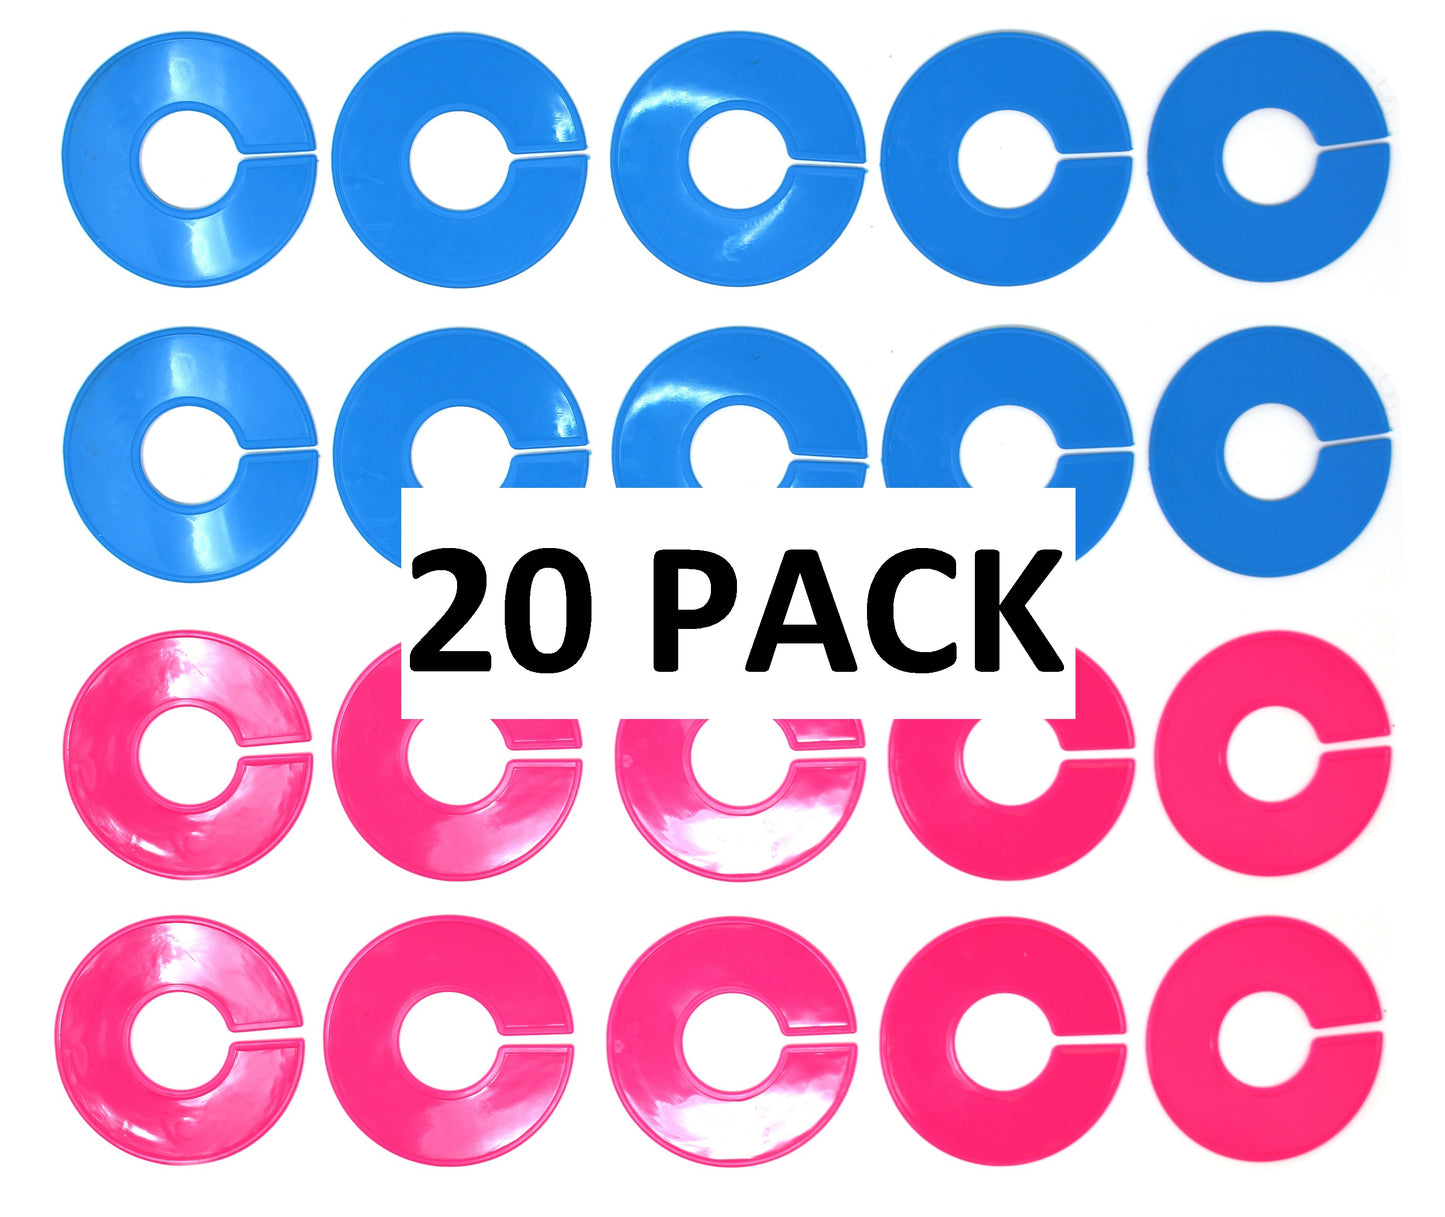 Pink and Blue Round Clothing Rack Size Divider for round & square rods - Multi-Pack